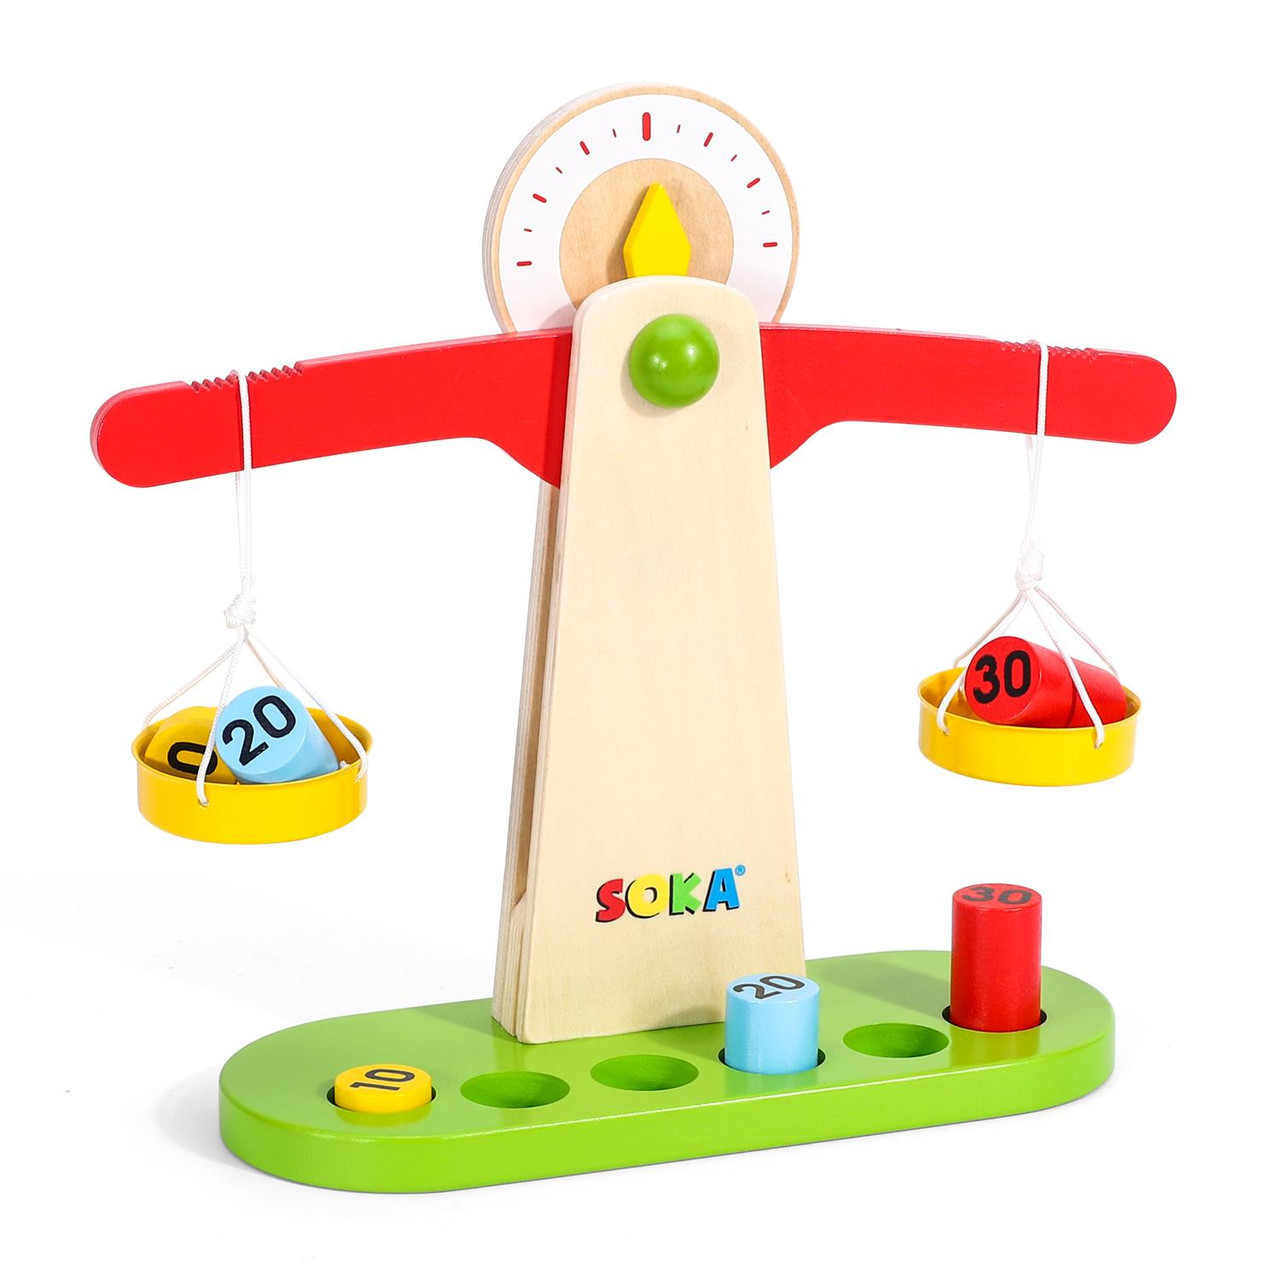 Toy Scale